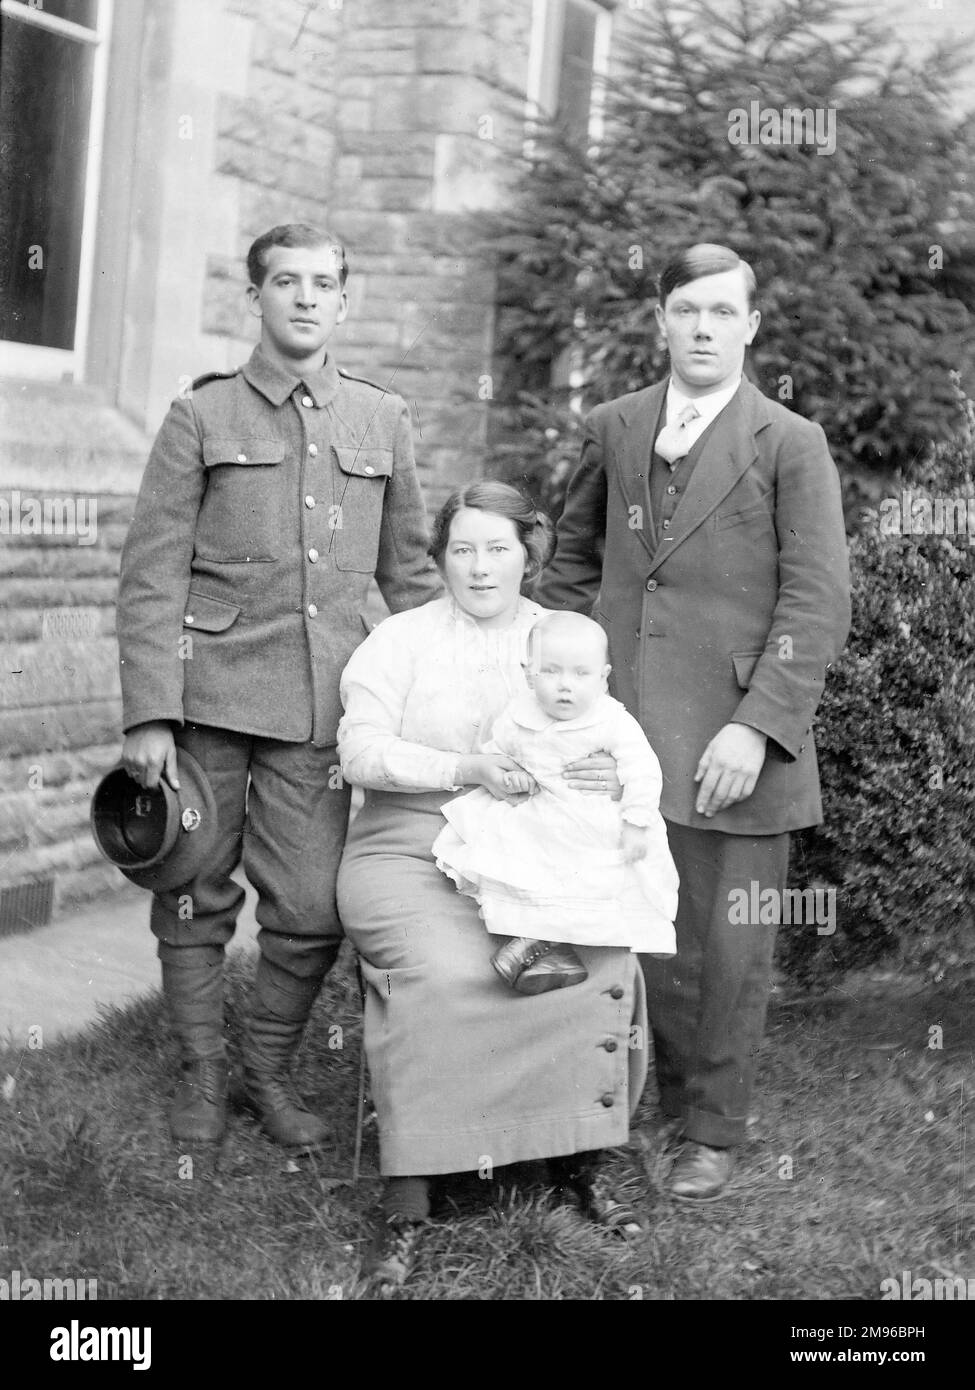 A family group photo in a garden, with a mother, her baby, and two men, one of them in uniform, during the First World War. Stock Photo